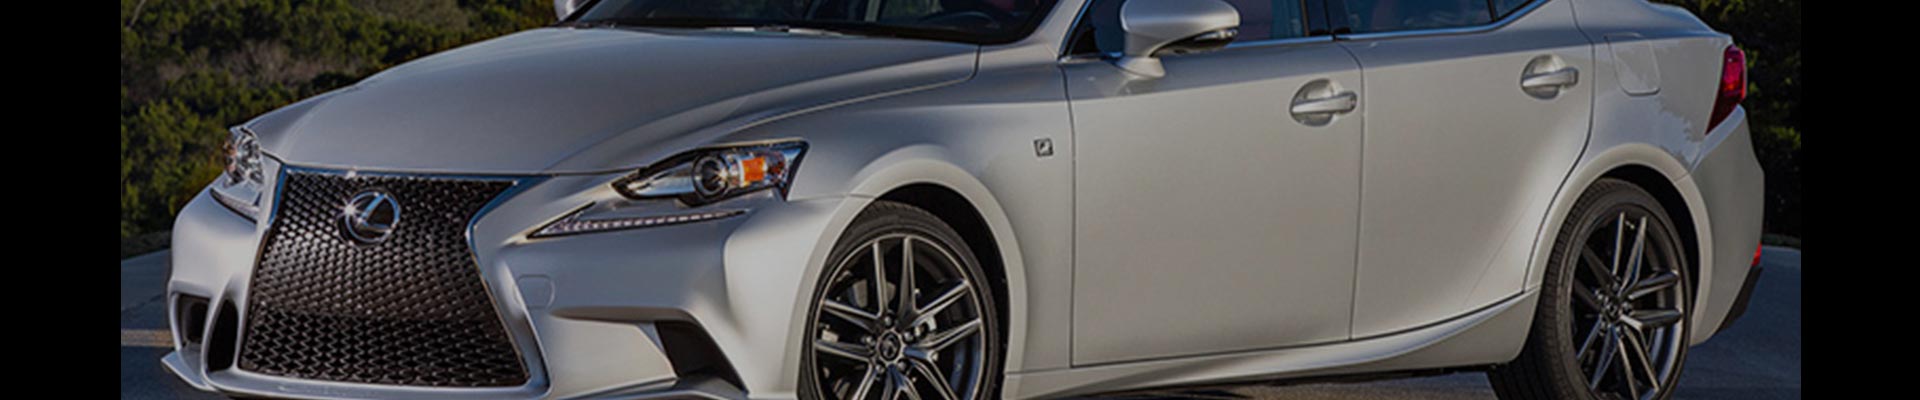 Shop Replacement and OEM 2007 Lexus IS350 Parts with Discounted Price on the Net